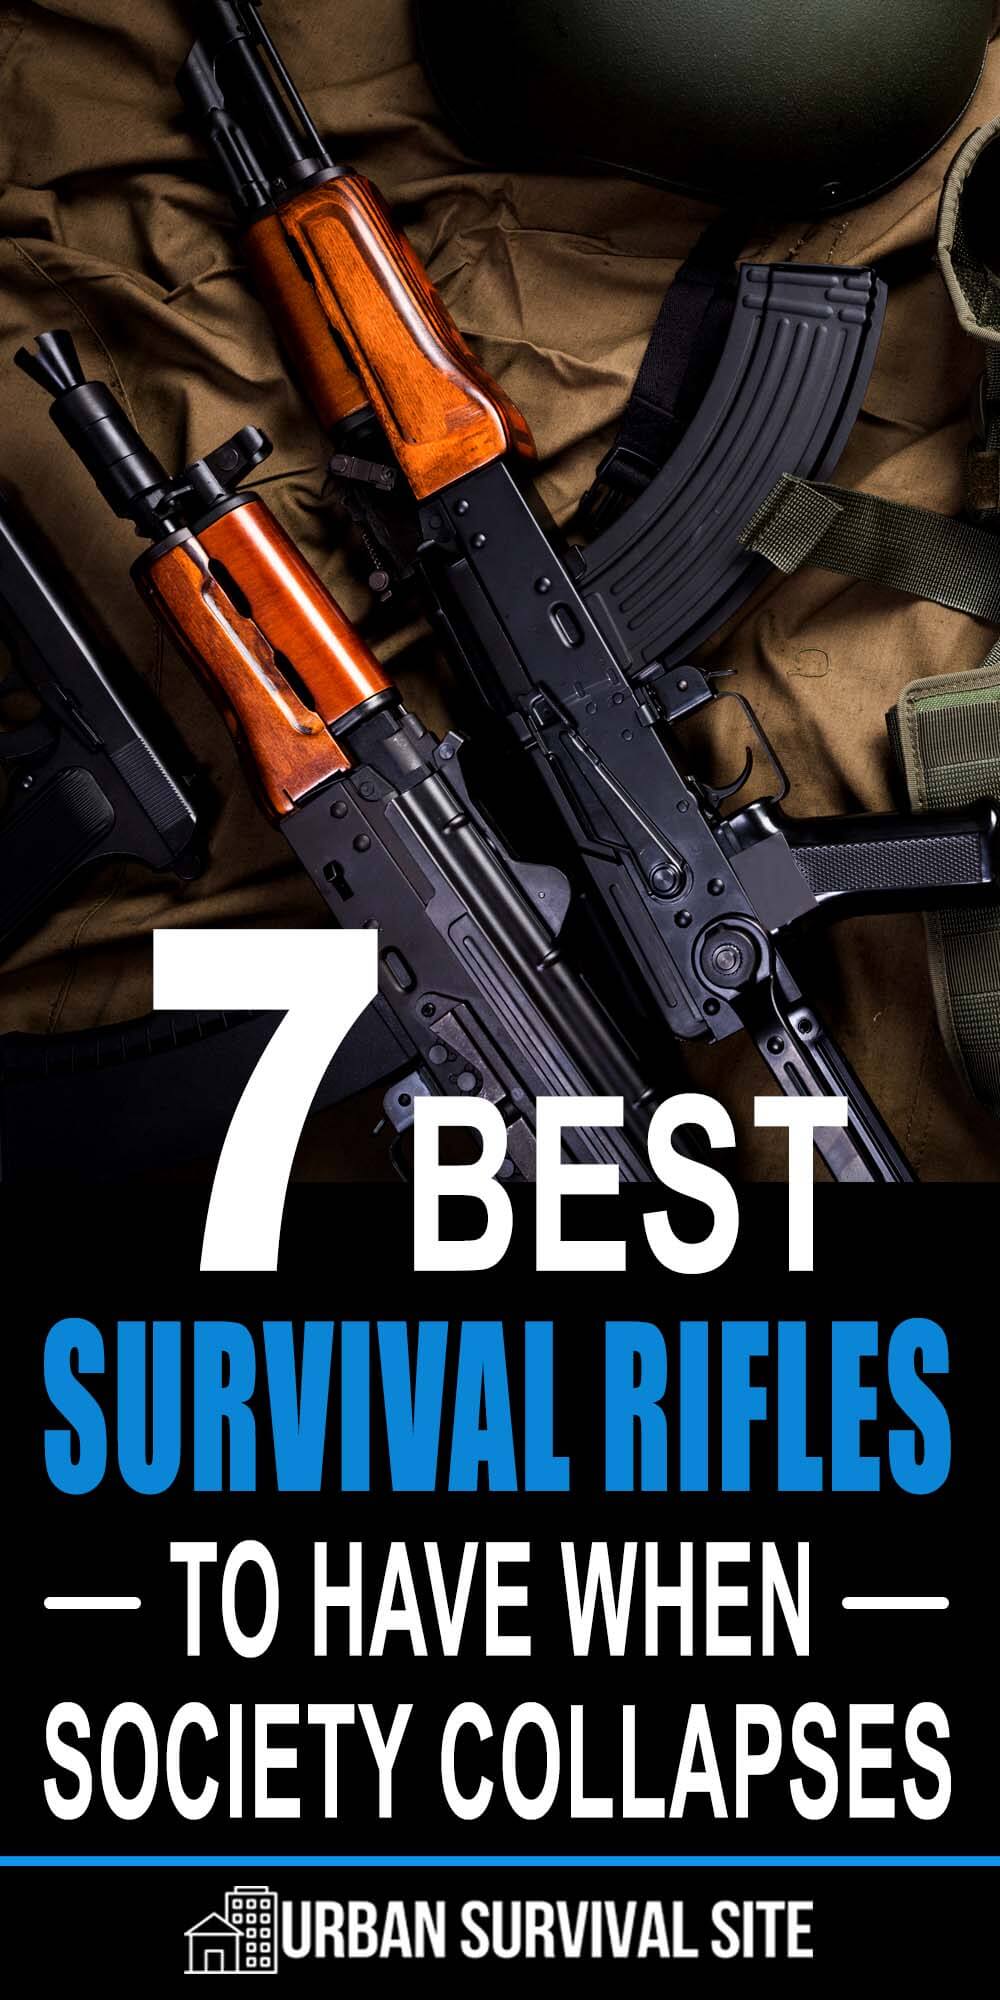 7 Best Survival Rifles To Have When Society Collapses